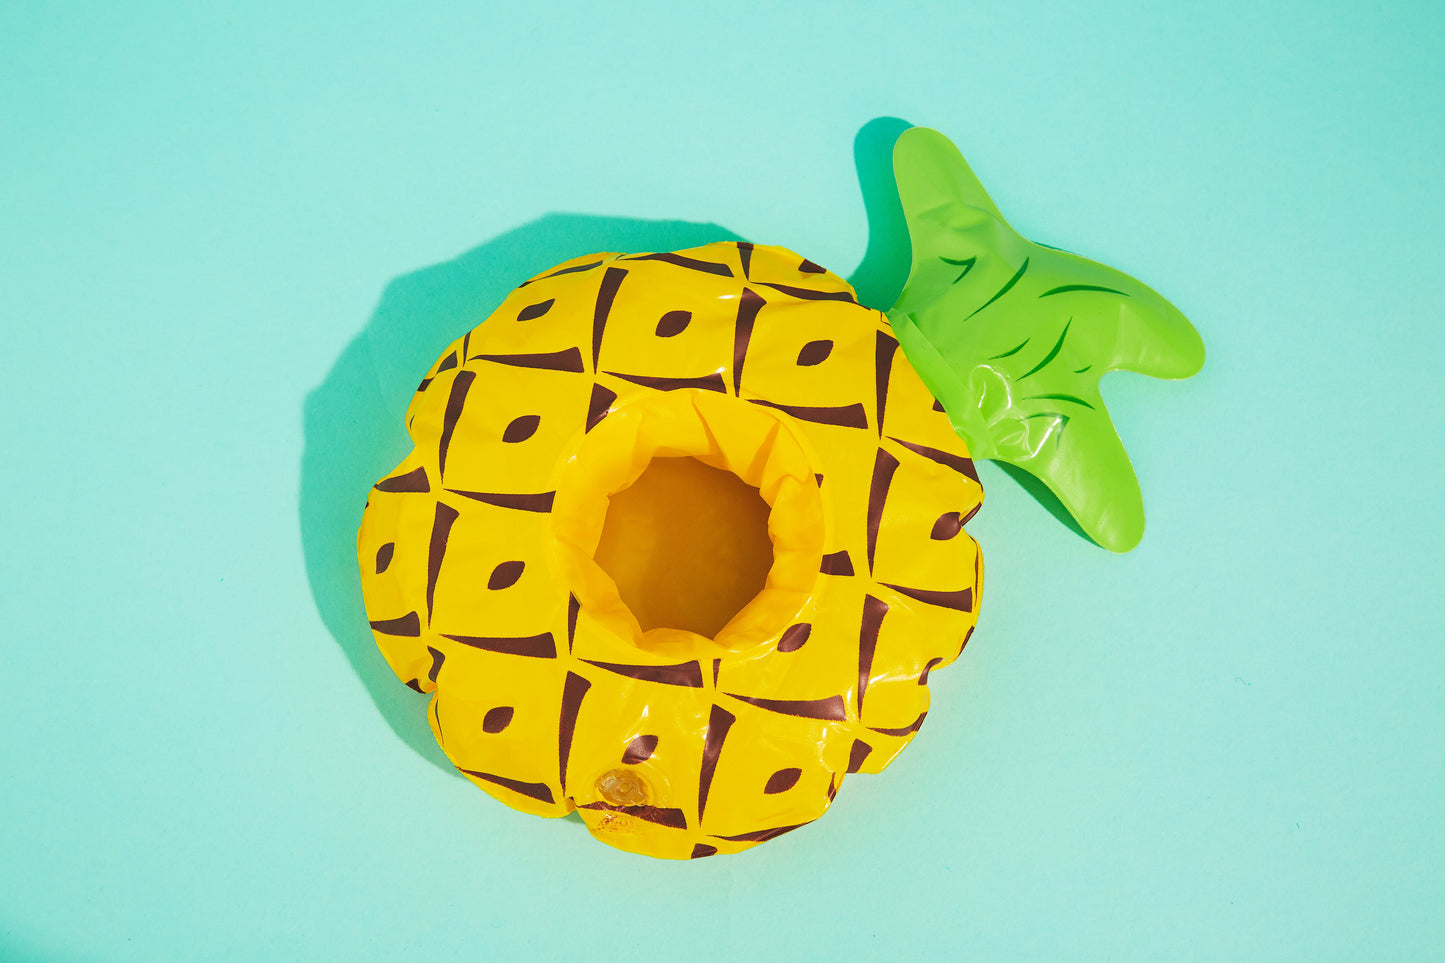 Inflatable Pineapple Drink Holder